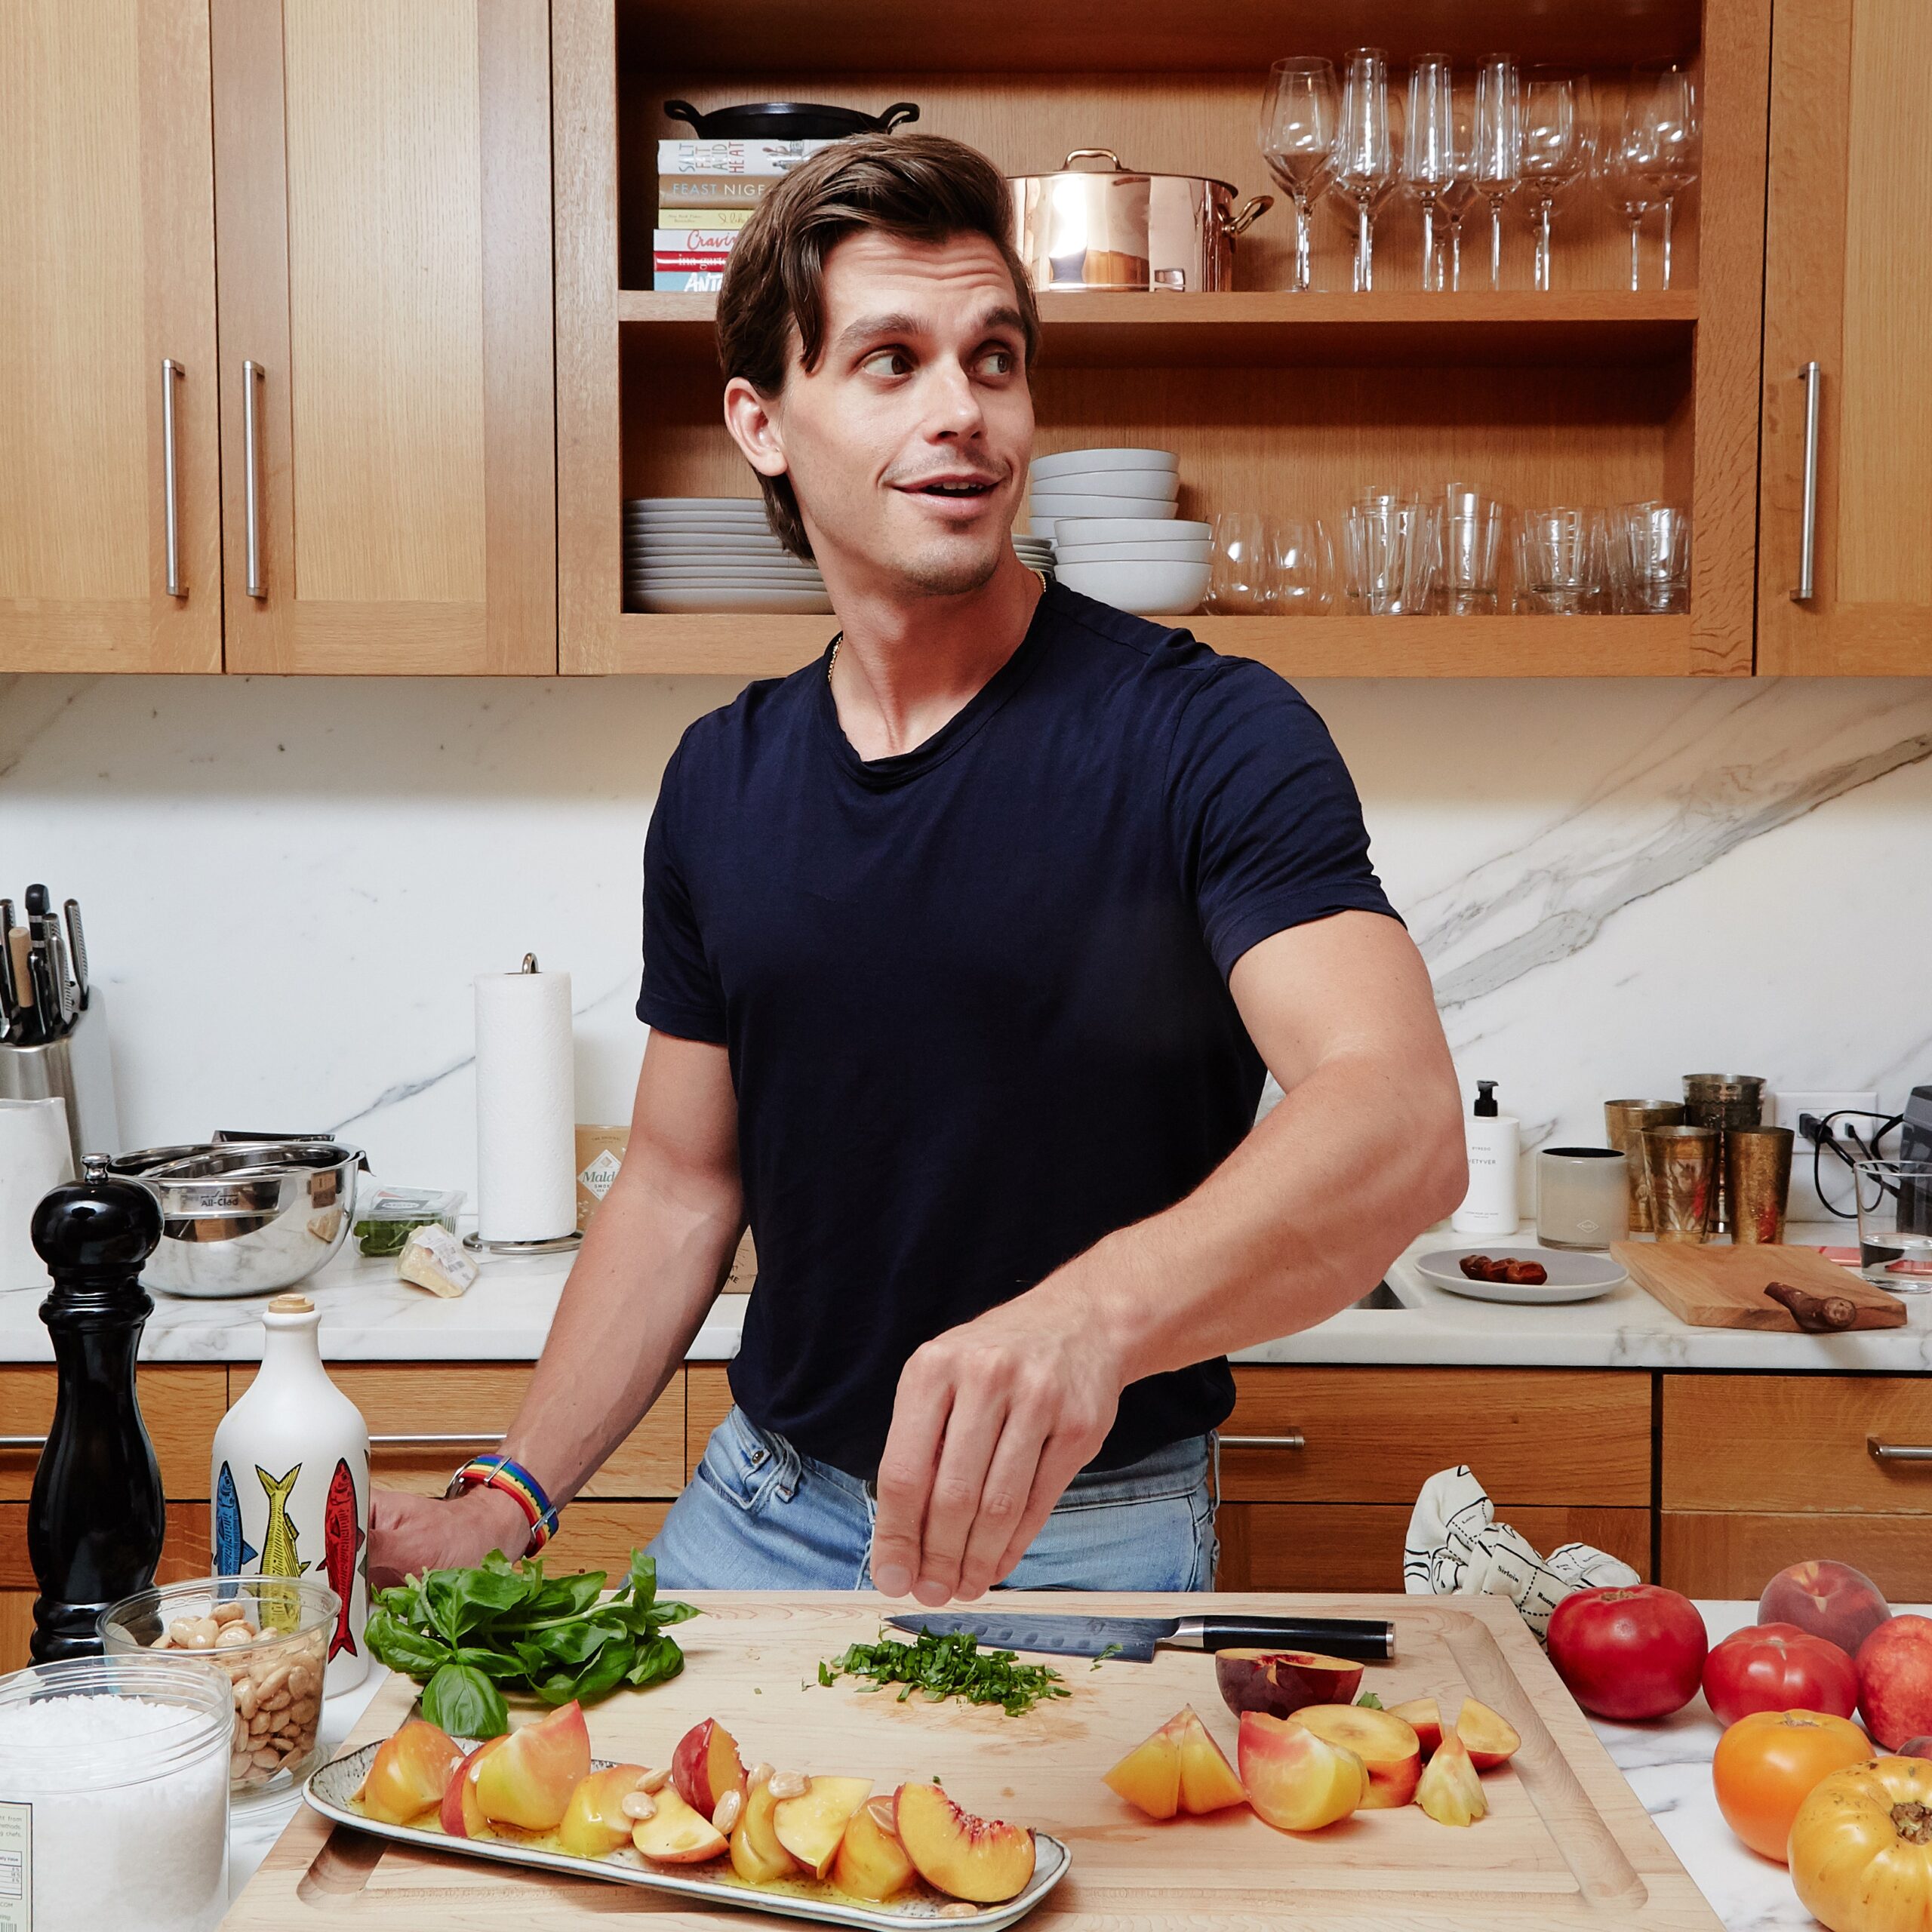 Antoni Porowski to cook with students during virtual Q&A